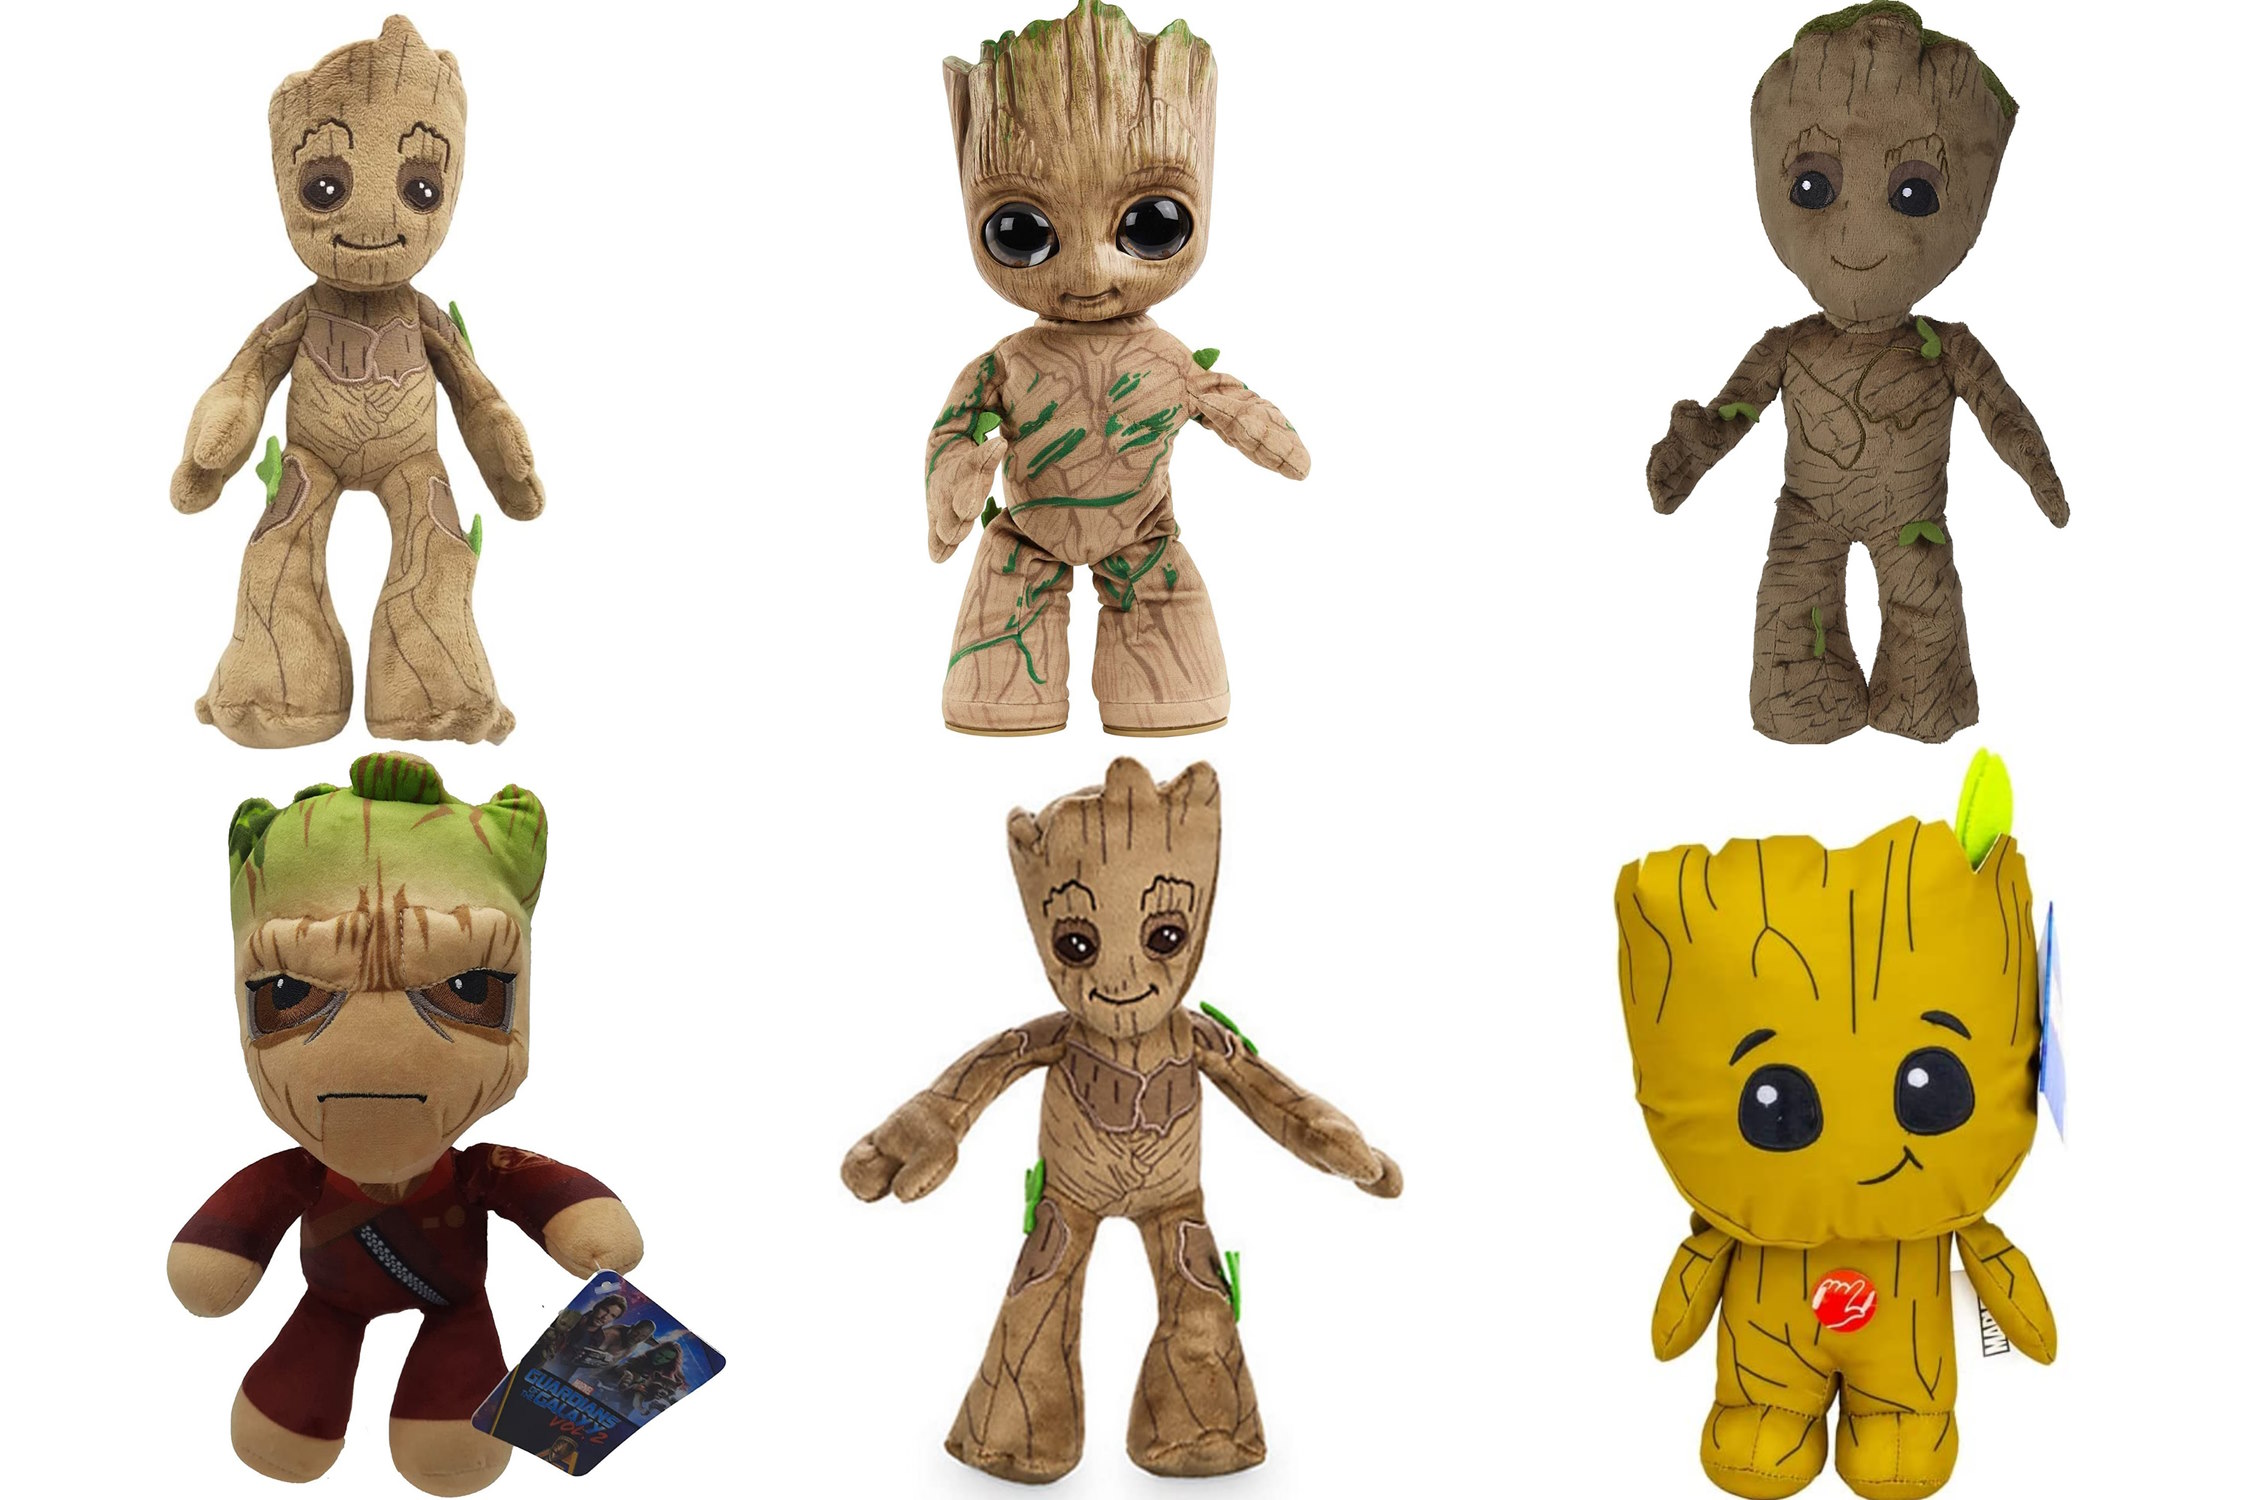 Guardians of the Galaxy Groot plush toy